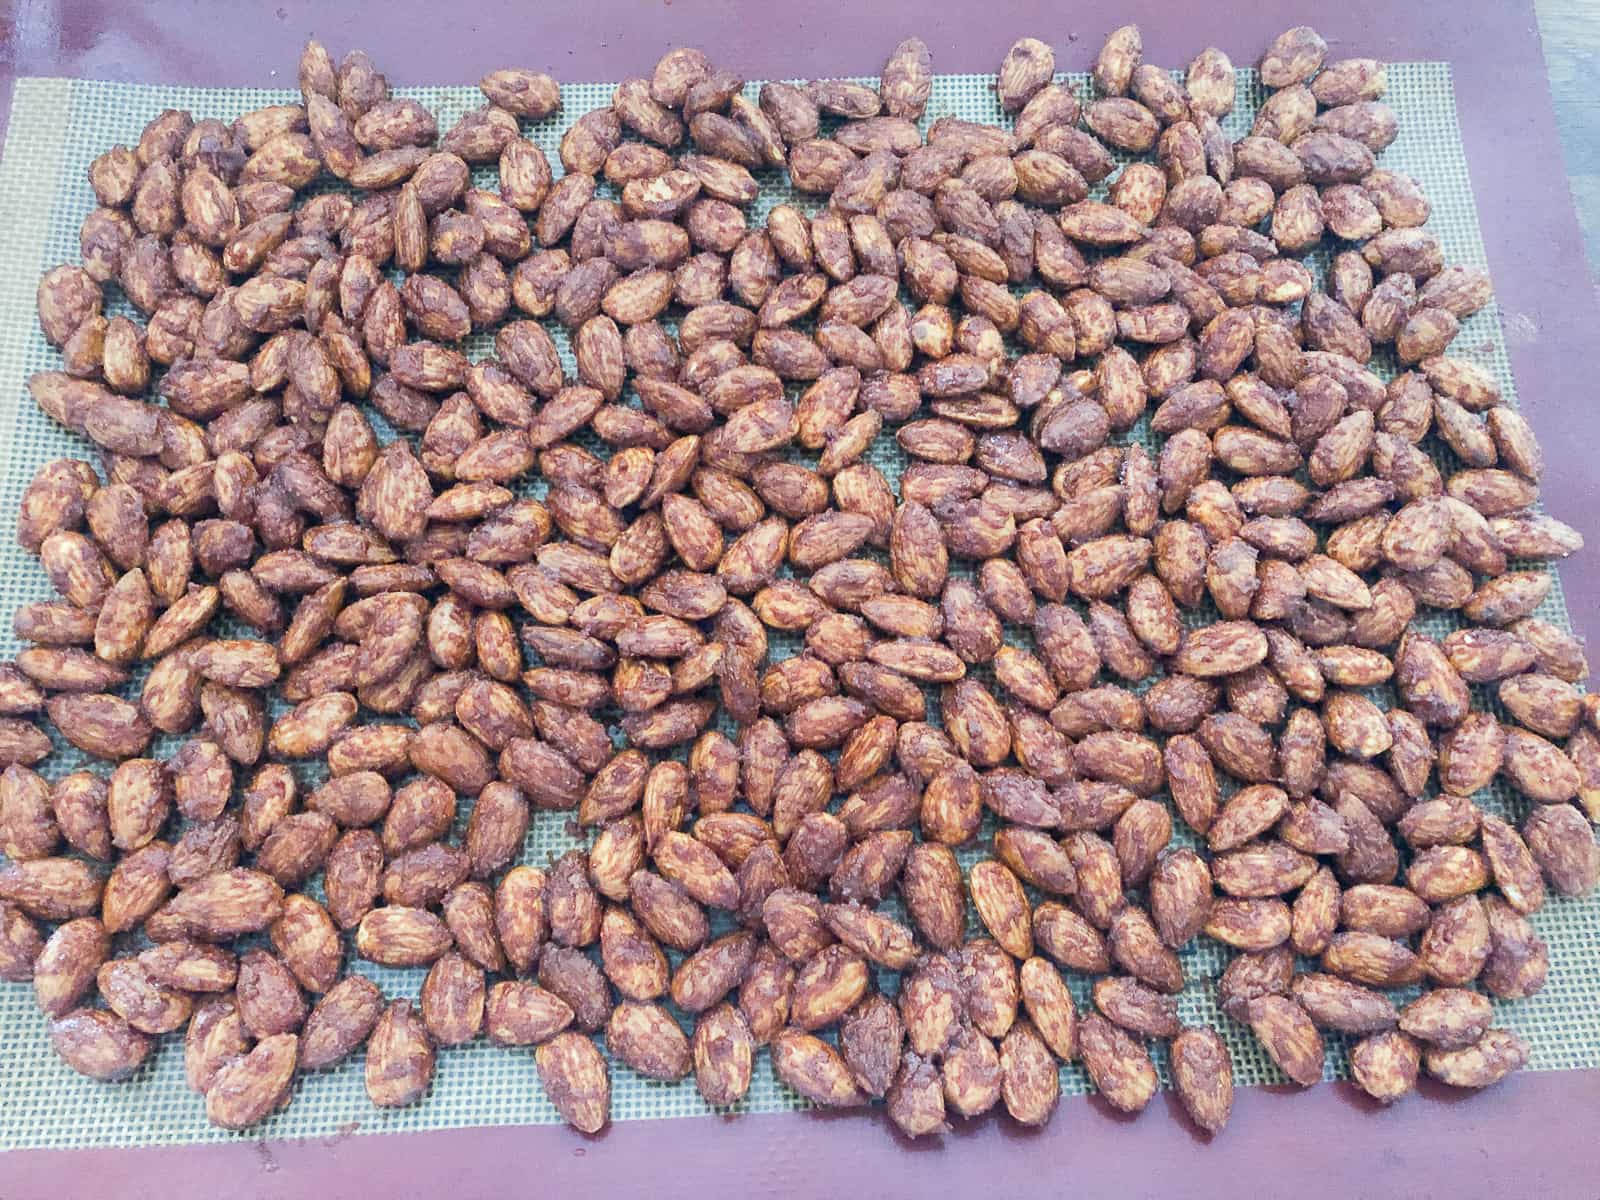 Almonds on a baking tray with a spice coating.